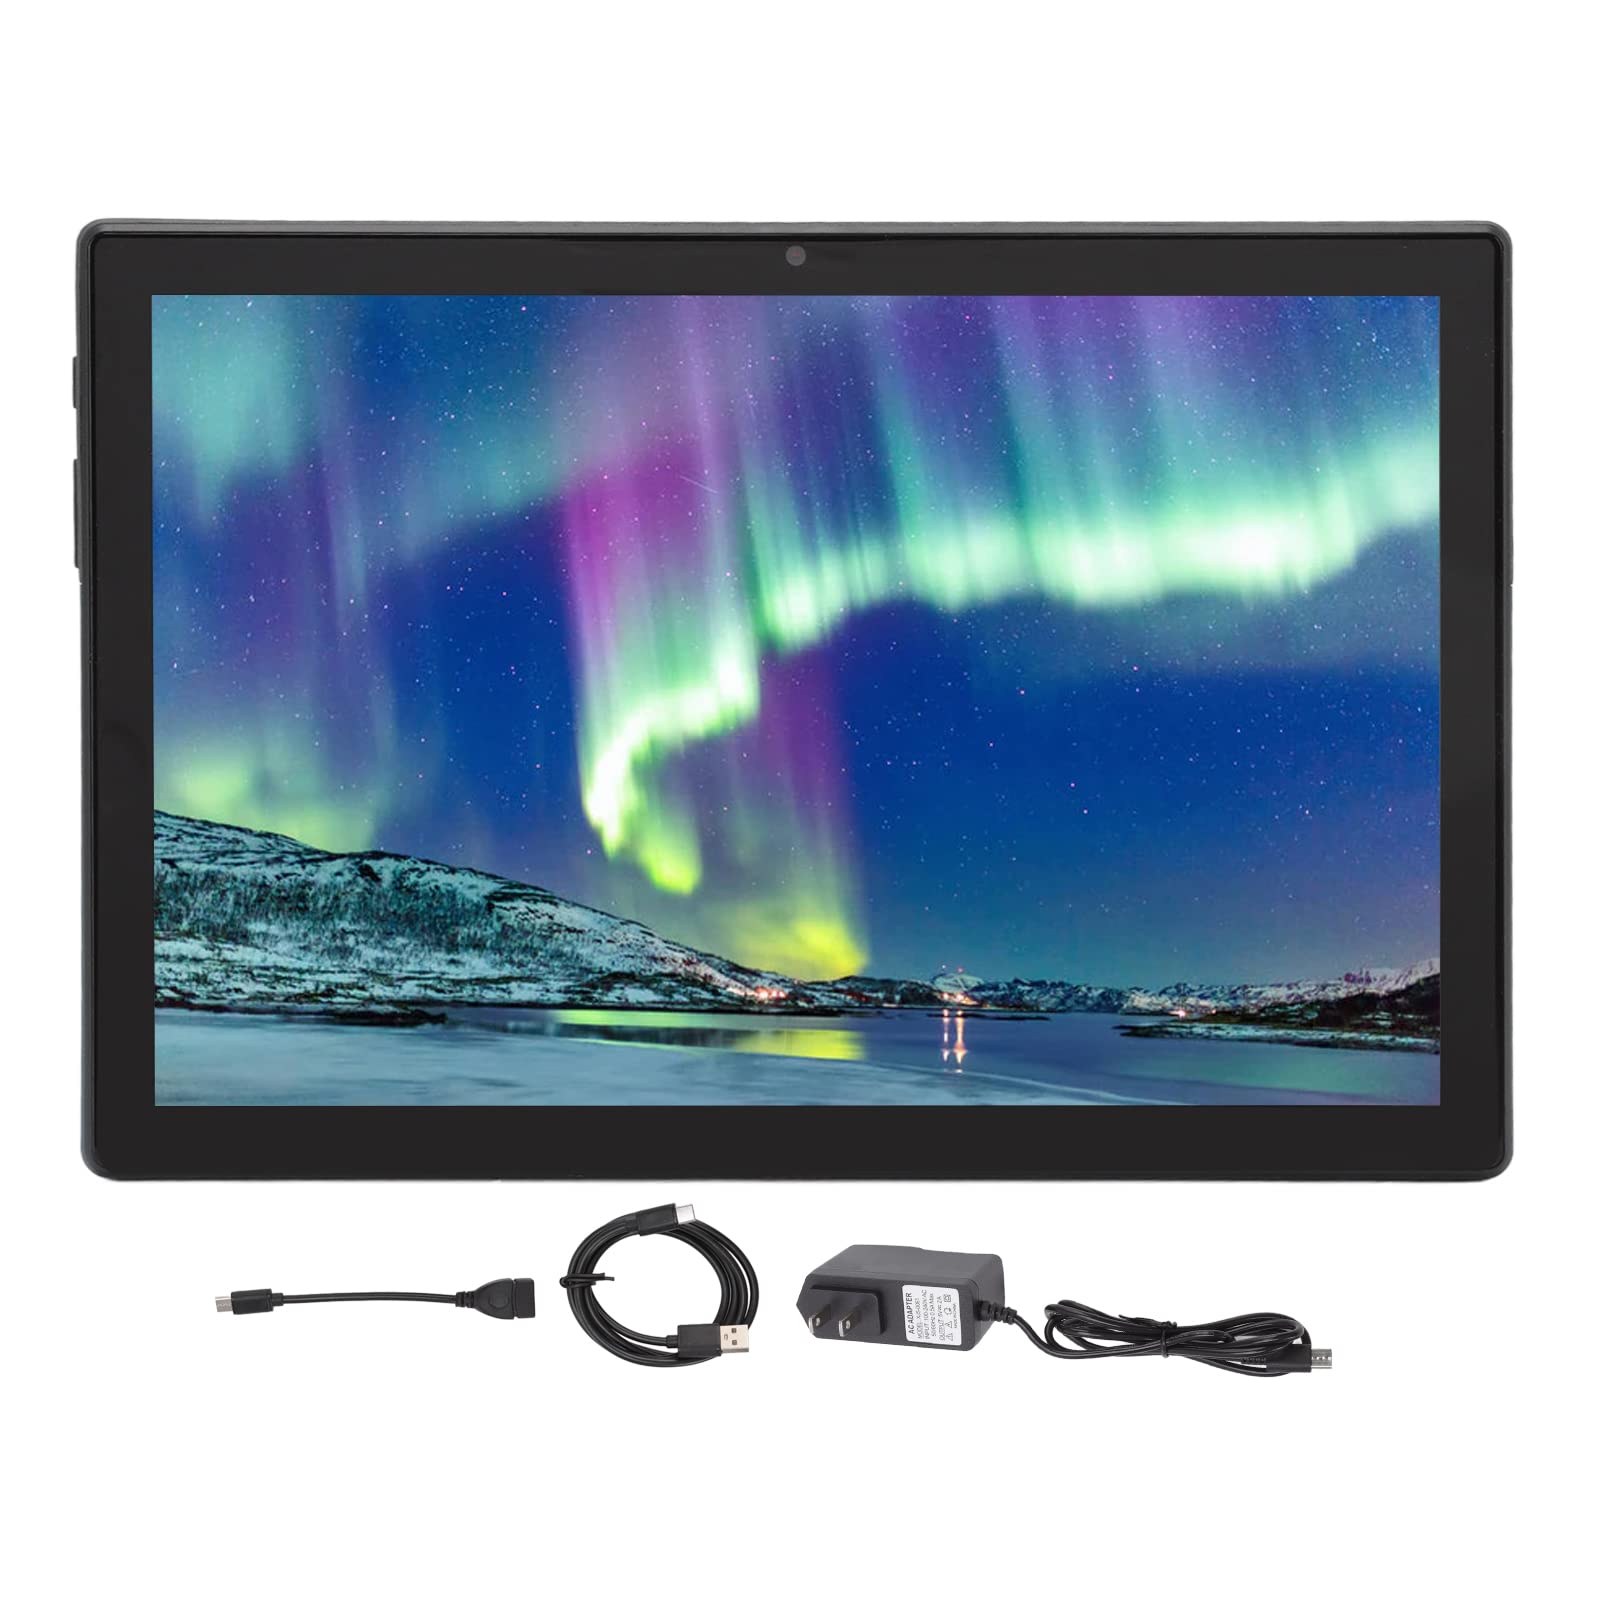 SALALIS Large Screen Tablet, 5500mAh Tablet Octa Core Processor 100-240V 5MP Front Canera with Flashlight for Kids(#2)